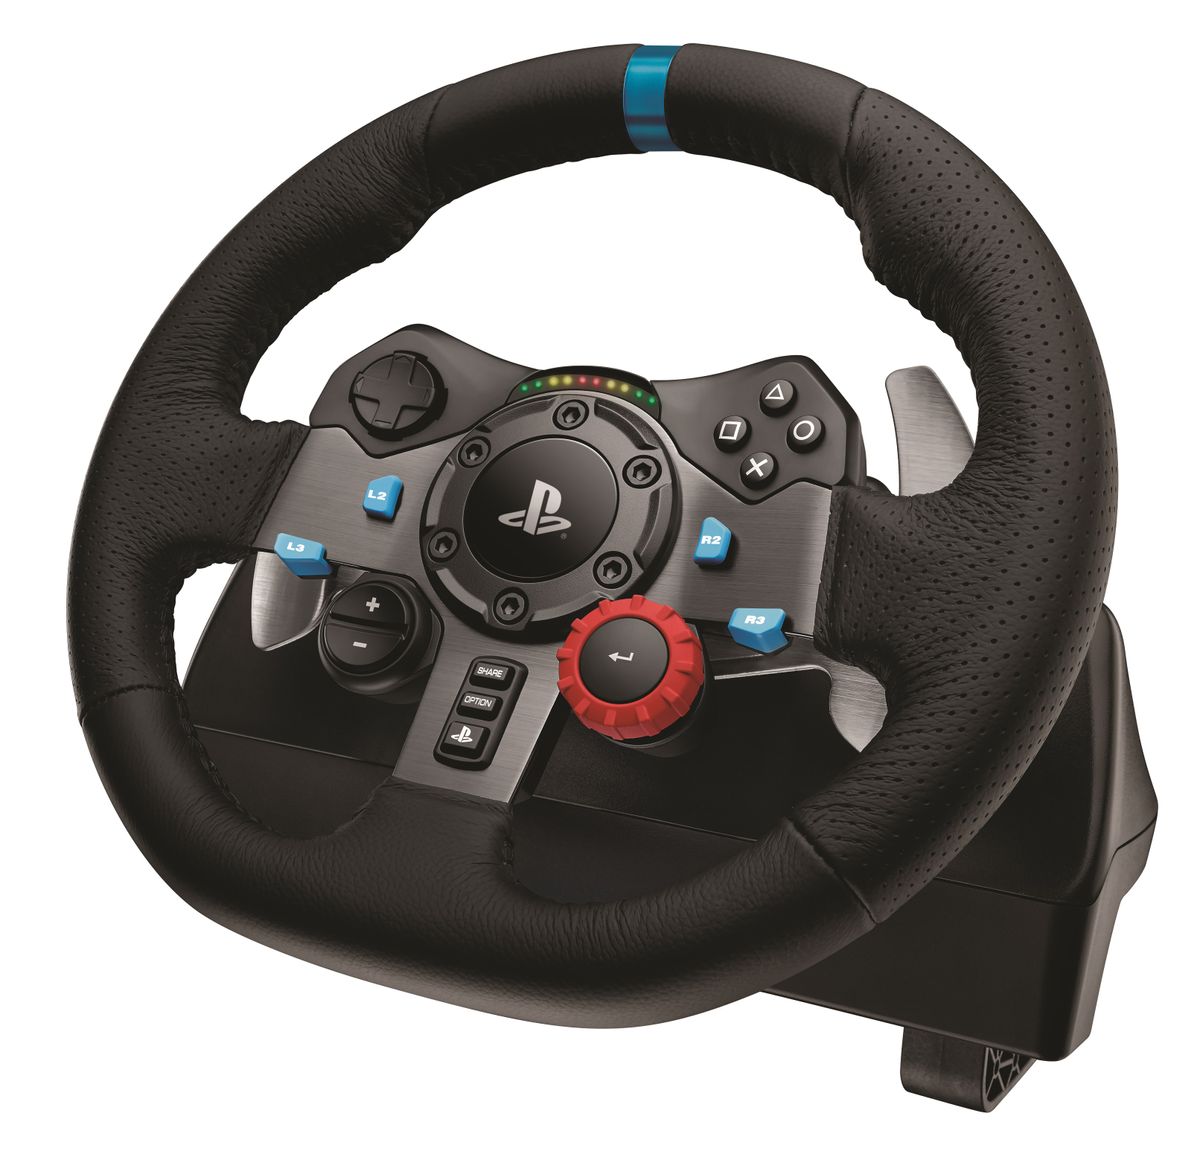 Behind the wheel of Logitech's G29 Driving Force controller